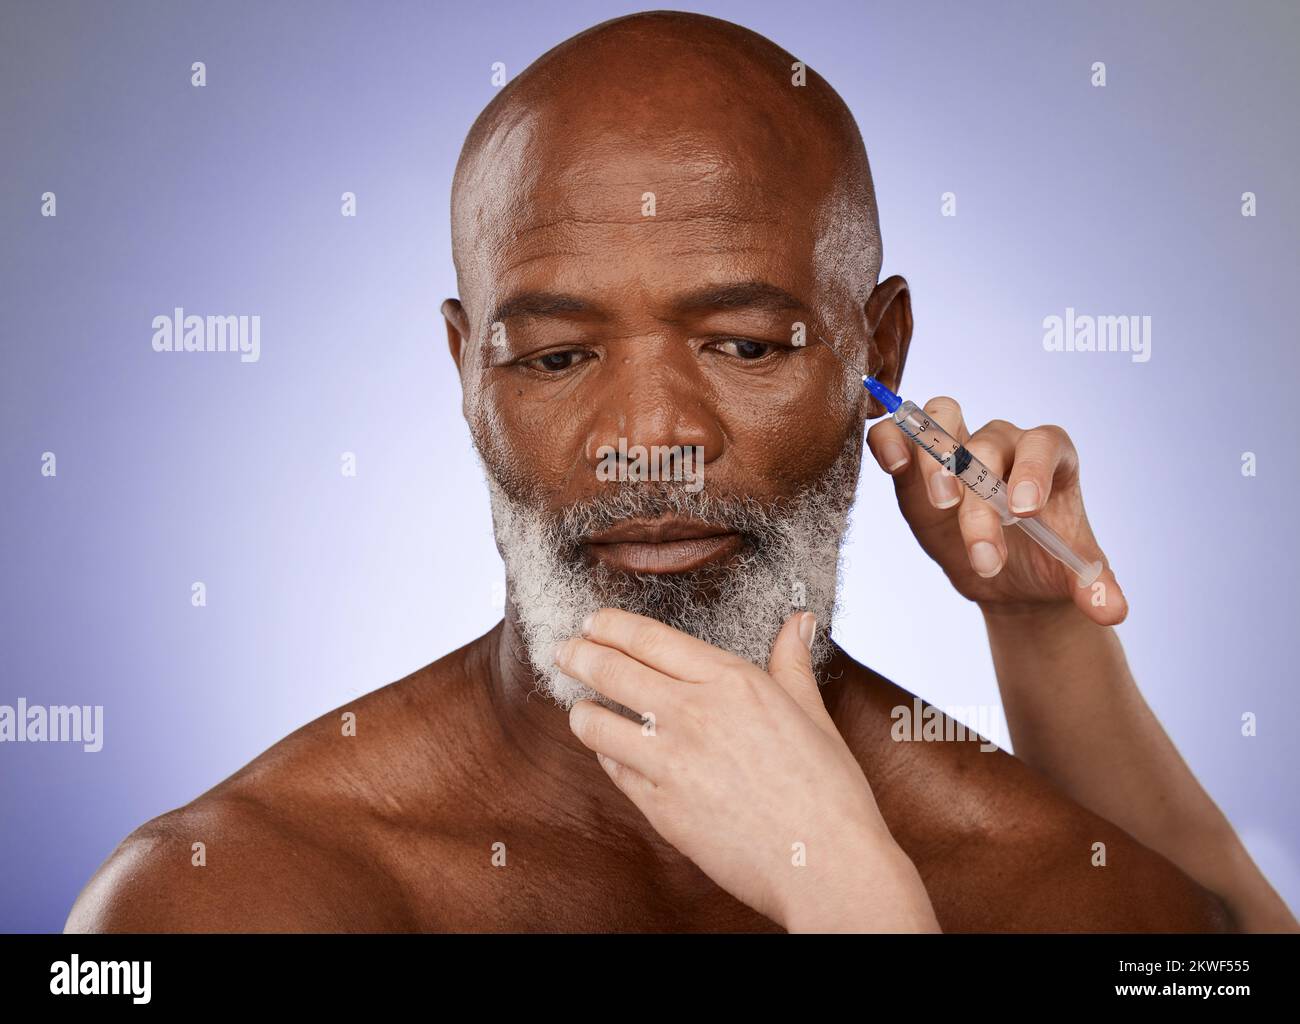 Skincare, botox injection and senior man getting anti aging treatment in face on studio background. Healthcare, medical insurance and hands with Stock Photo